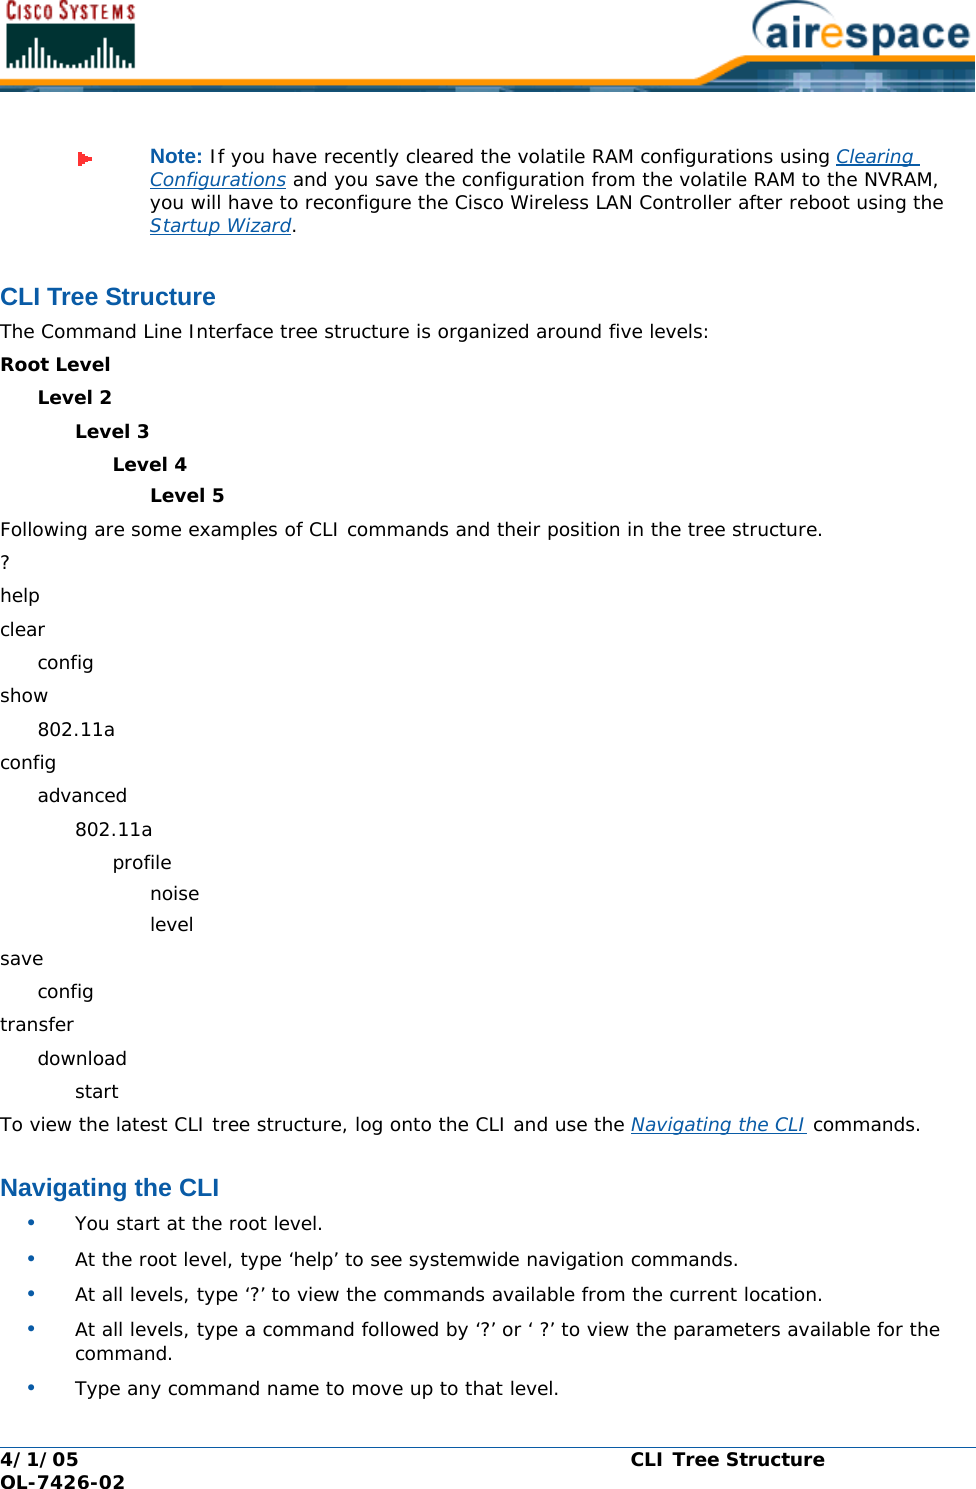 4/1/05 CLI Tree Structure  OL-7426-02CLI Tree StructureCLI Tree StructureThe Command Line Interface tree structure is organized around five levels:Root LevelLevel 2Level 3Level 4Level 5Following are some examples of CLI commands and their position in the tree structure.?helpclearconfigshow802.11aconfigadvanced802.11aprofilenoiselevelsaveconfigtransferdownloadstartTo view the latest CLI tree structure, log onto the CLI and use the Navigating the CLI commands.Navigating the CLINavigating the CLI•You start at the root level.•At the root level, type ‘help’ to see systemwide navigation commands.•At all levels, type ‘?’ to view the commands available from the current location.•At all levels, type a command followed by ‘?’ or ‘ ?’ to view the parameters available for the command.•Type any command name to move up to that level.Note: If you have recently cleared the volatile RAM configurations using Clearing Configurations and you save the configuration from the volatile RAM to the NVRAM, you will have to reconfigure the Cisco Wireless LAN Controller after reboot using the Startup Wizard.